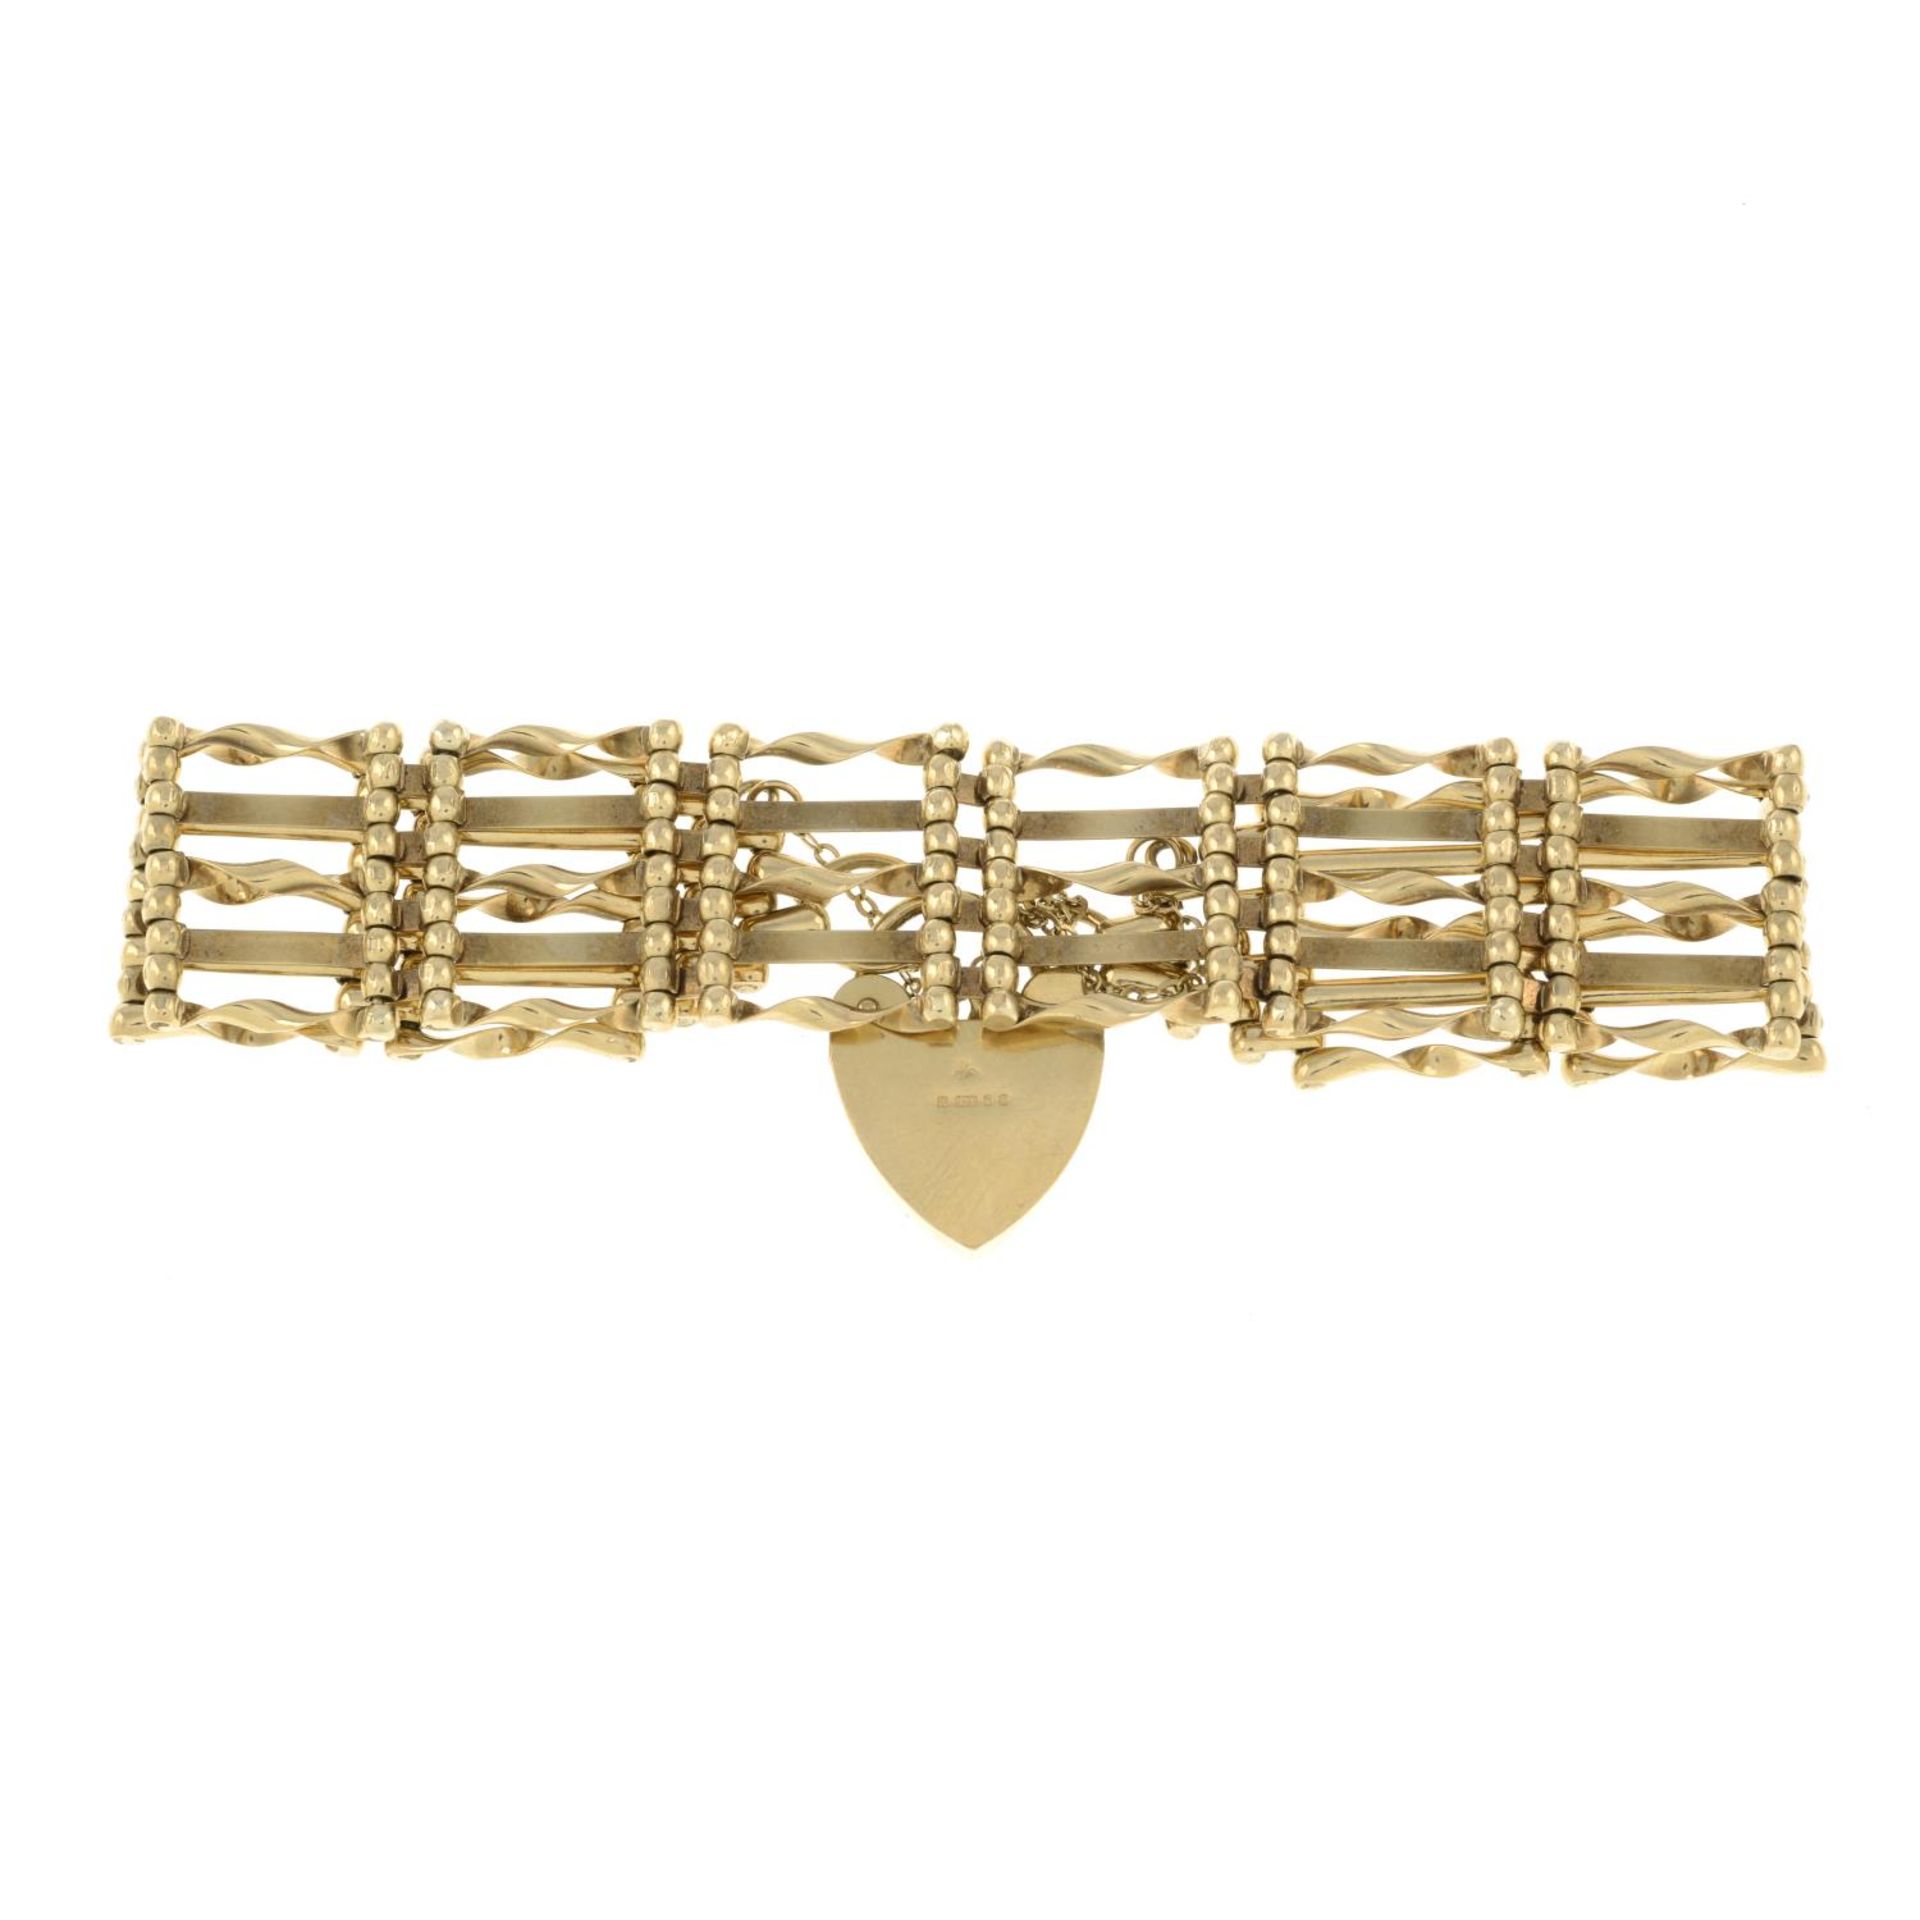 A 9ct gold gate-link bracelet, with heart padlock clasp.Hallmarks for London, 1976.Length 18cms. - Image 2 of 2